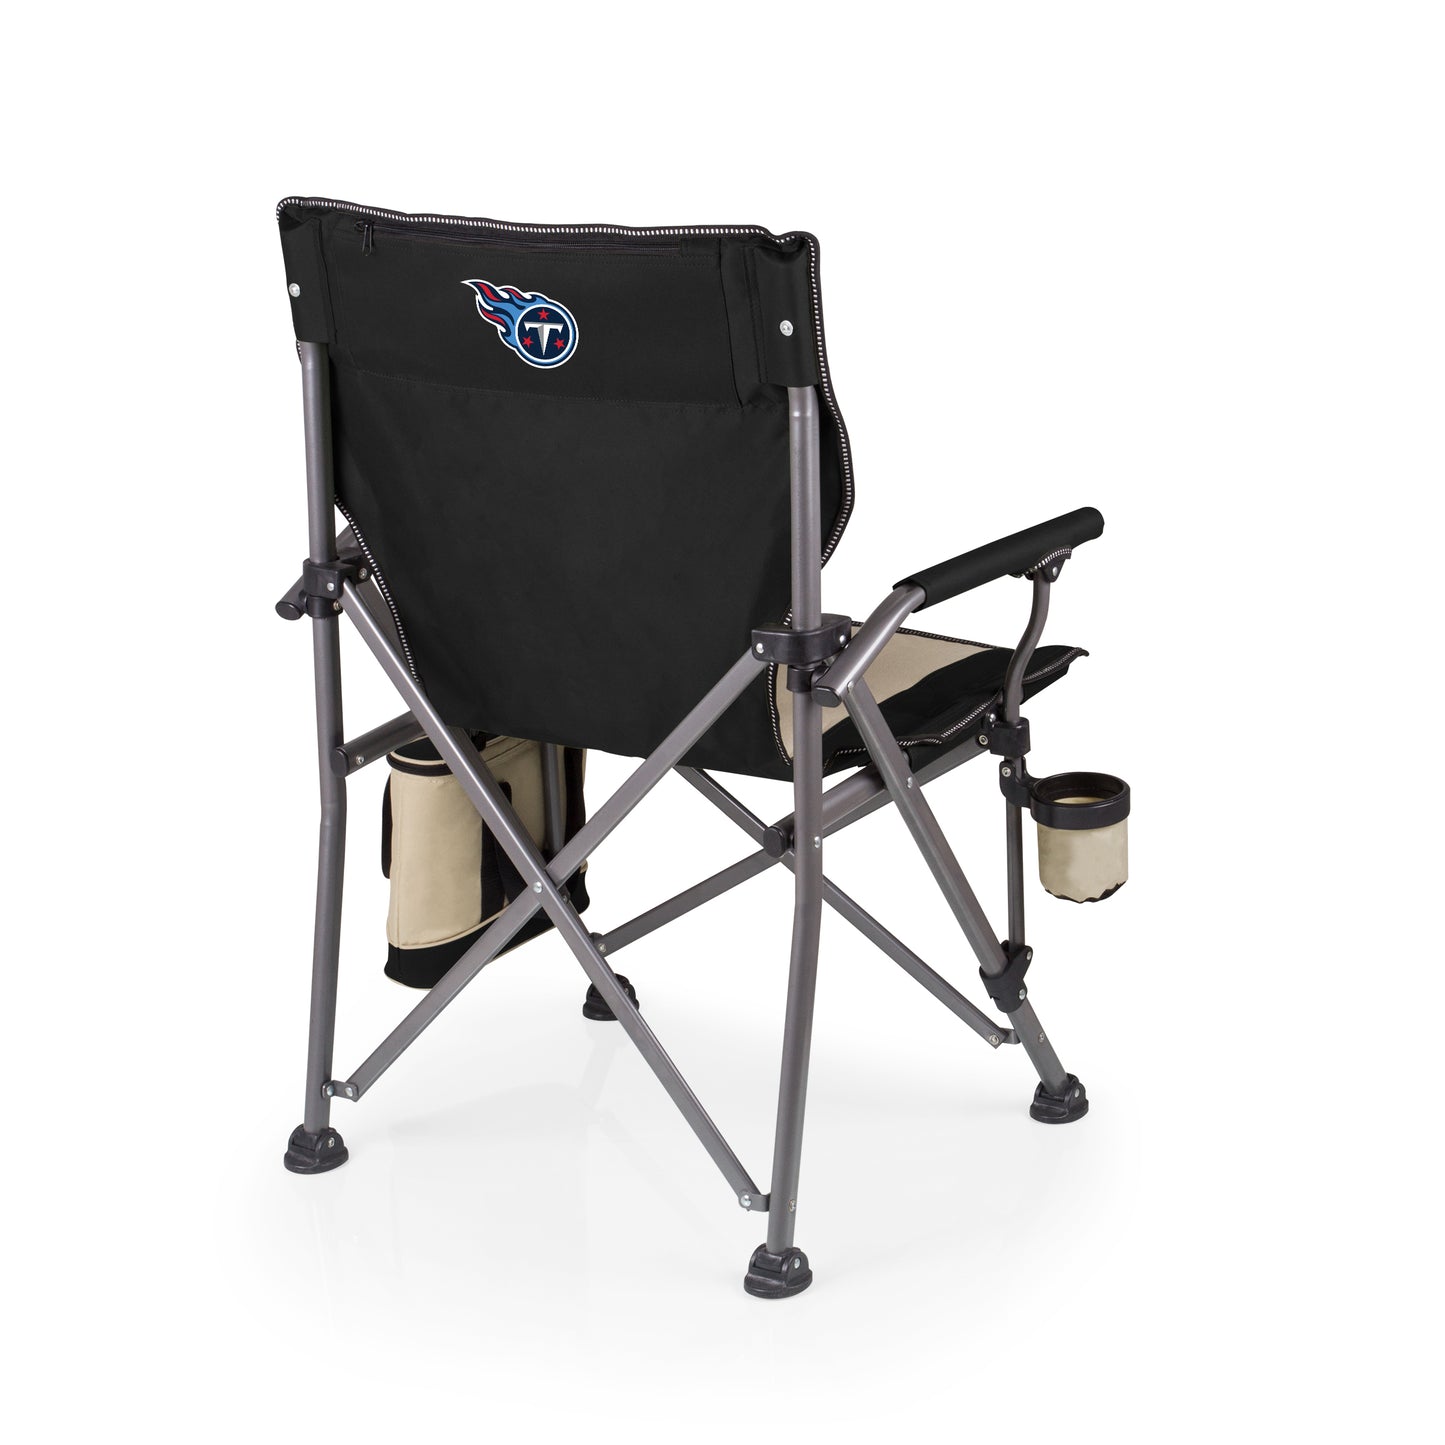 Tennessee Titans - Outlander Folding Camping Chair with Cooler